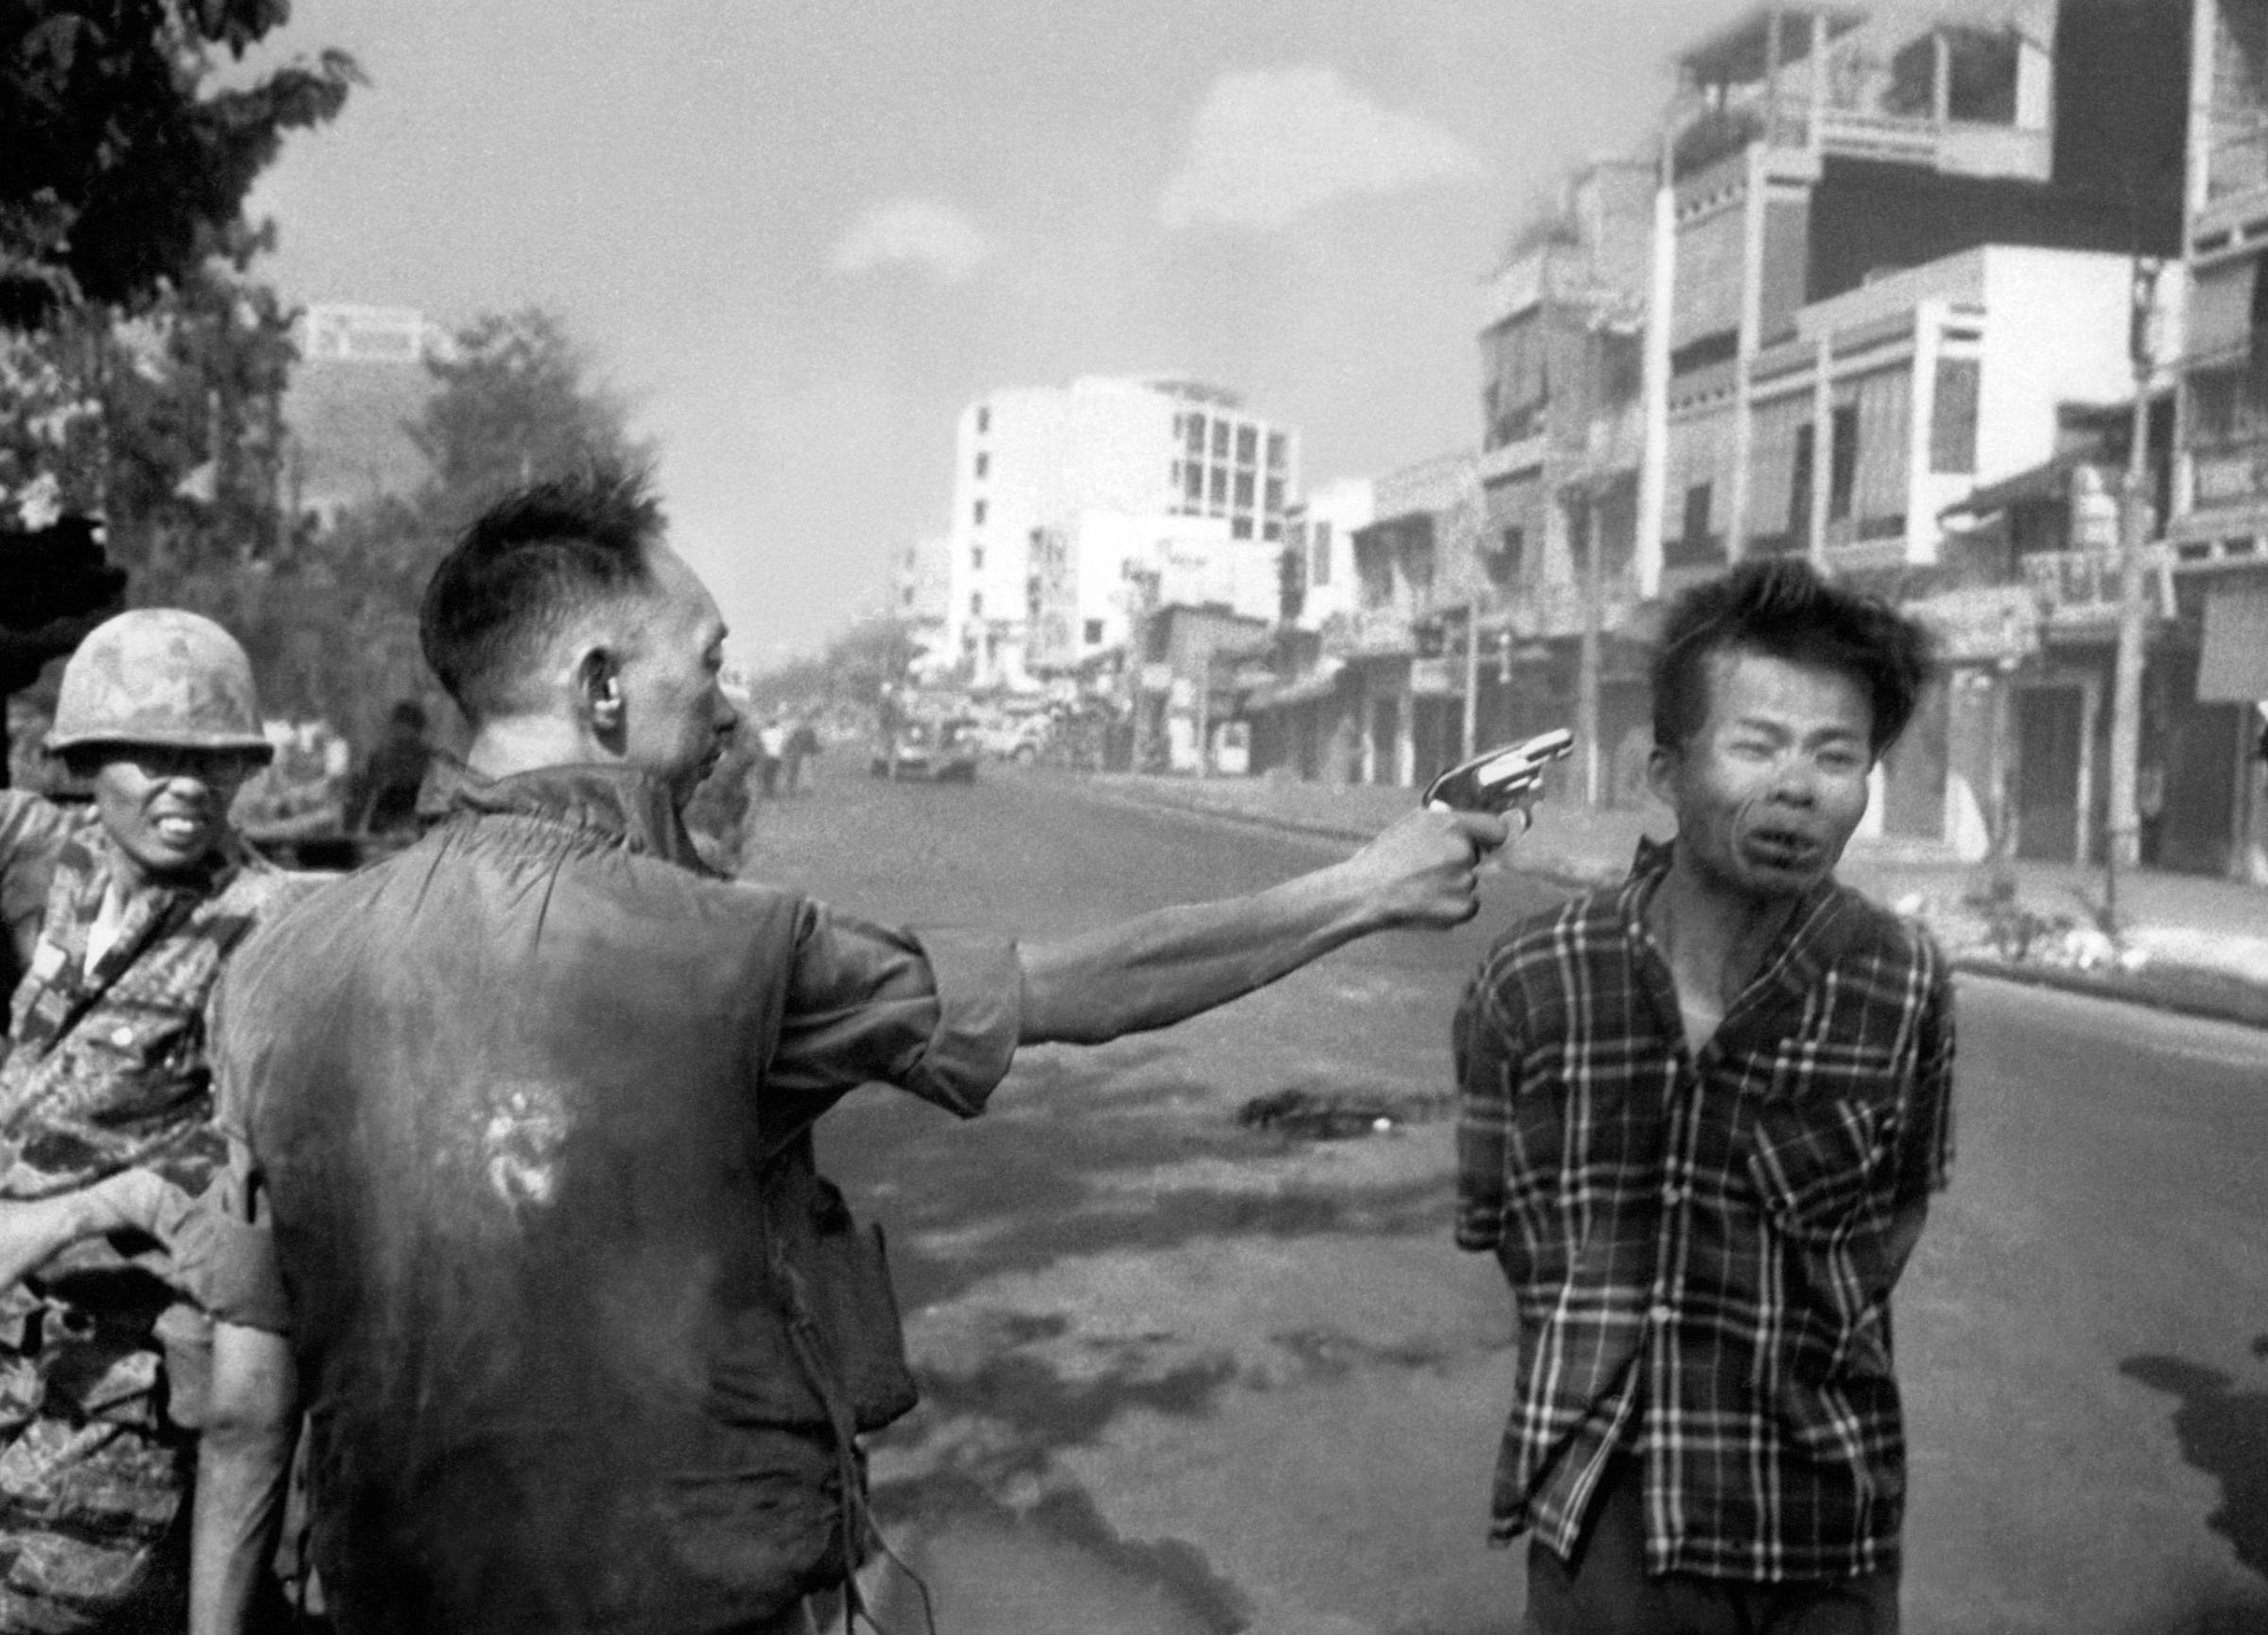 South Vietnamese Gen. Nguyen Ngoc Loan, chief of the national police, fires his pistol and executes suspected Viet Cong officer Nguyen Van Lem in Saigon on Feb. 1, 1968.